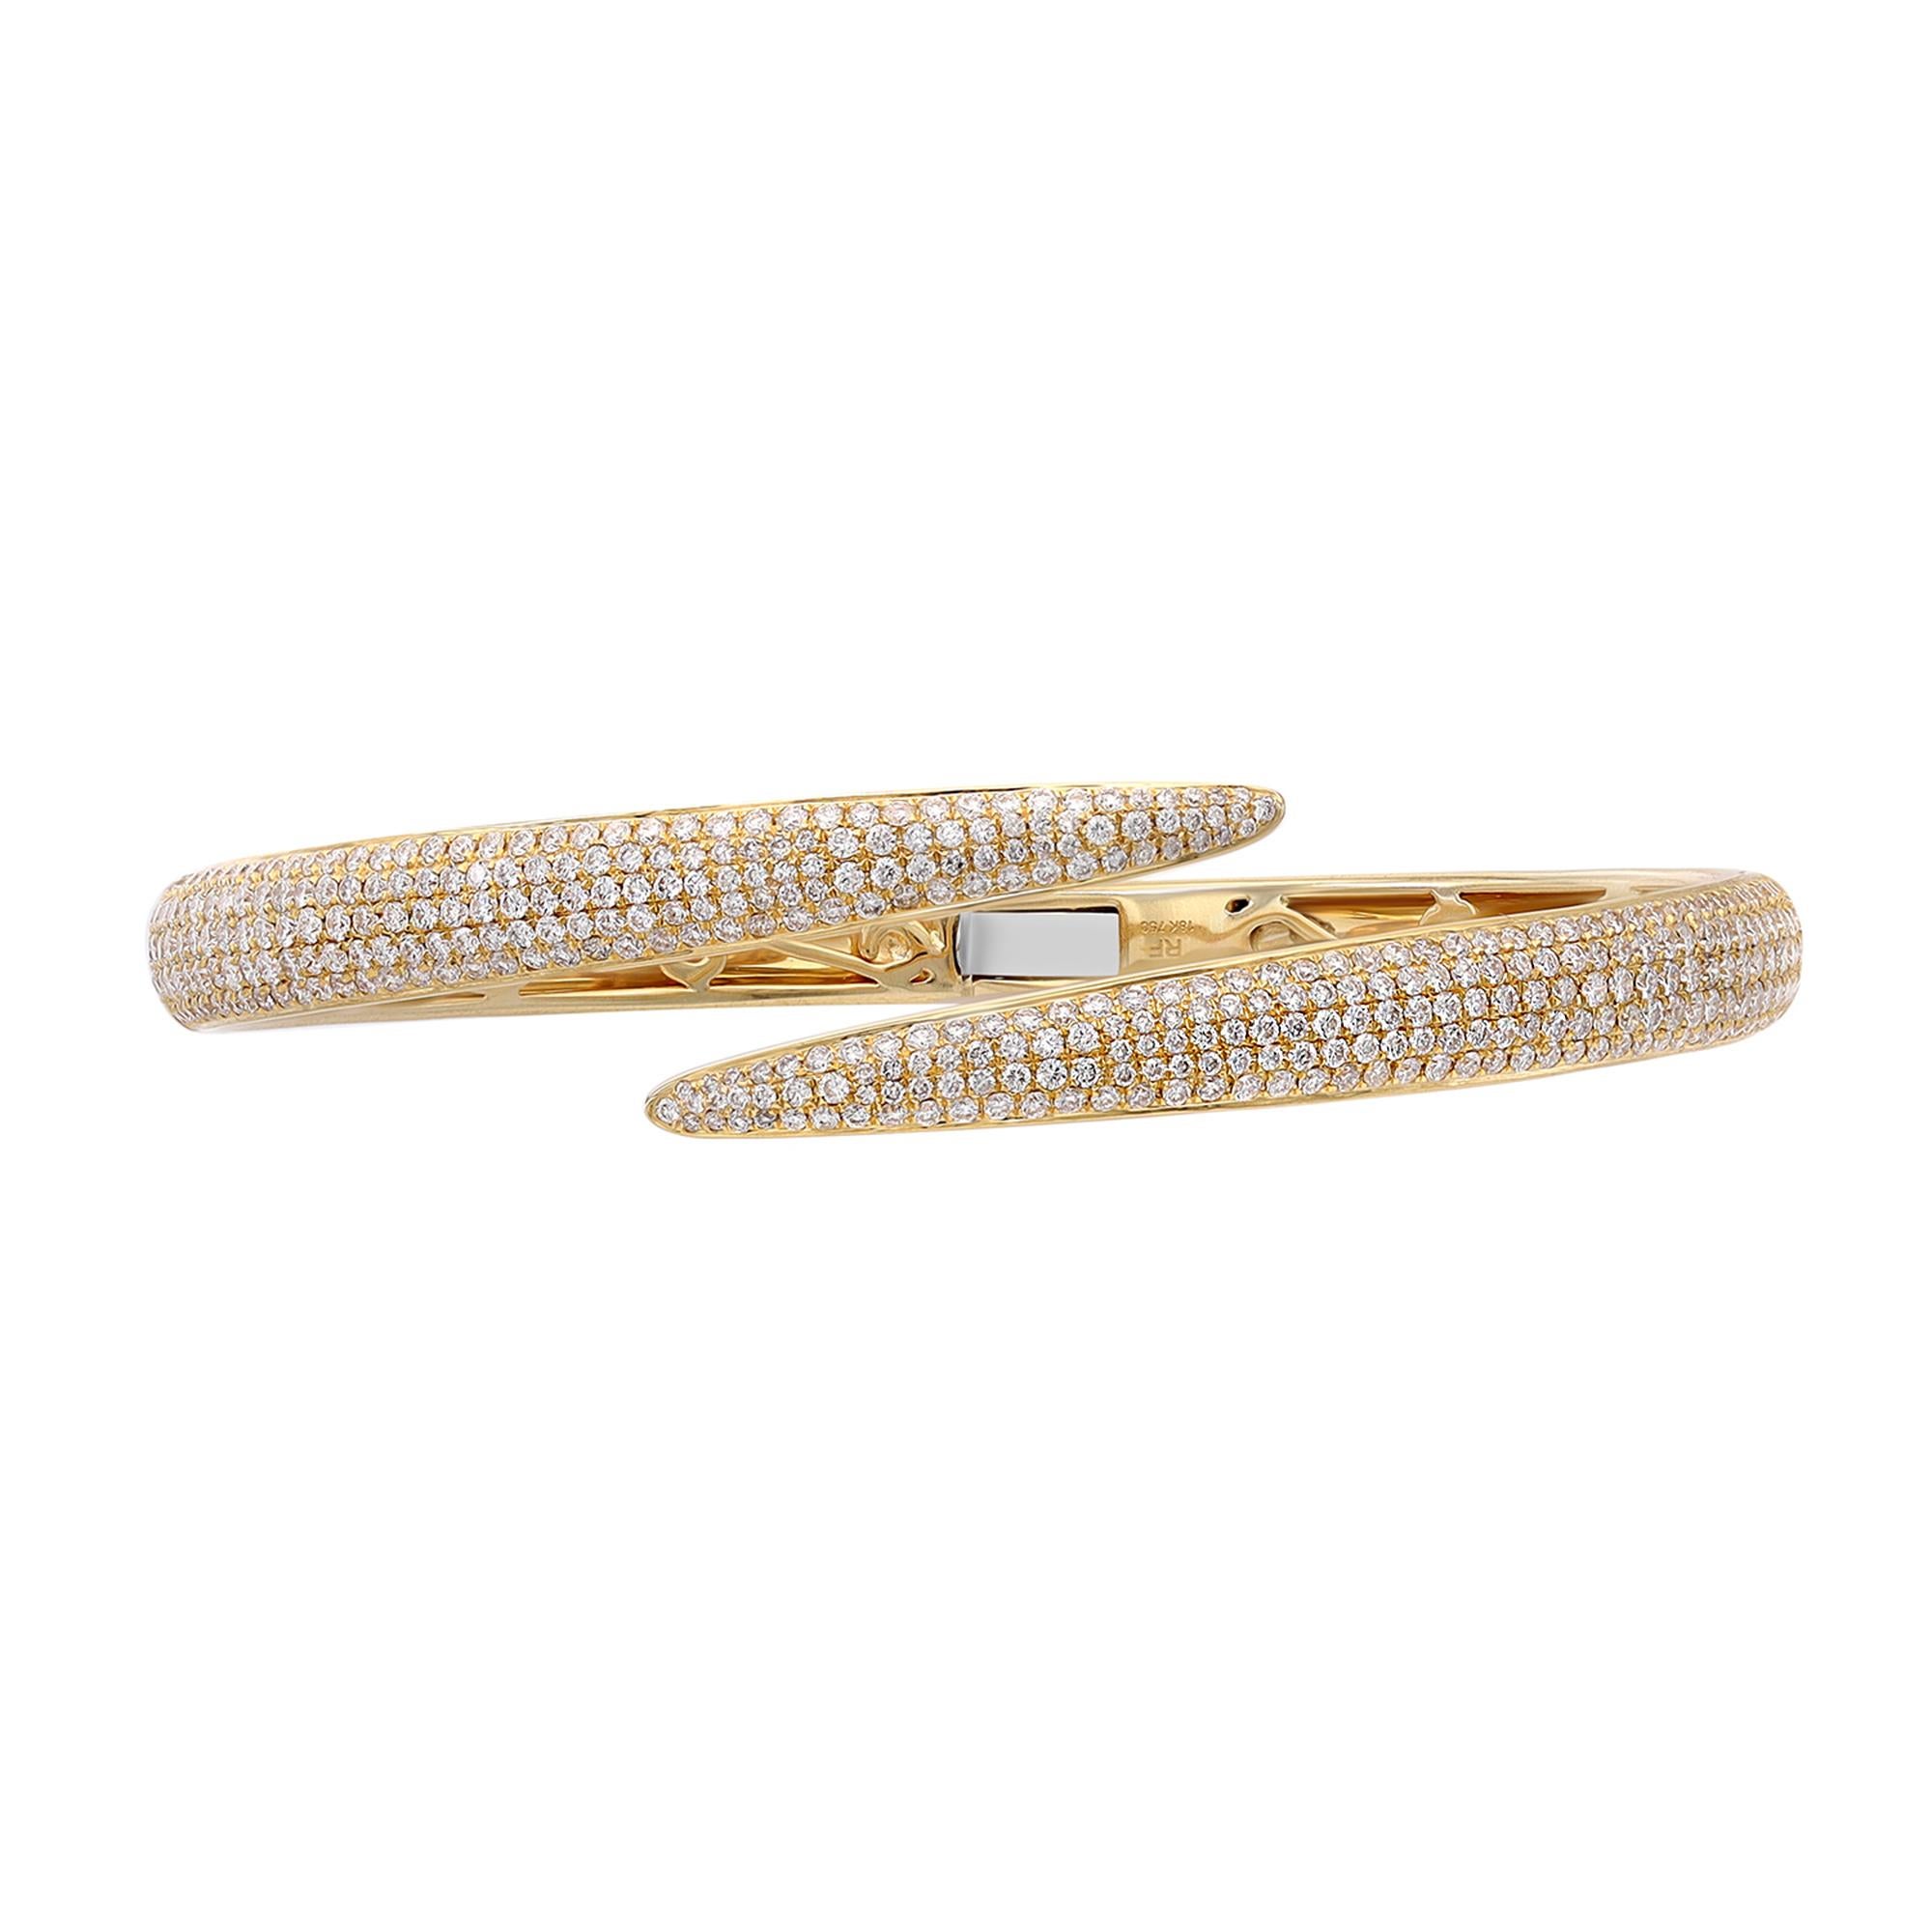 A classic look with easy elegance, this diamond bangle bracelet exudes sophistication. This stunning bracelet is crafted in 18k yellow gold and features pave set tiny white round cut diamonds with a total weight of 2.70 carats. Diamond color G-H and